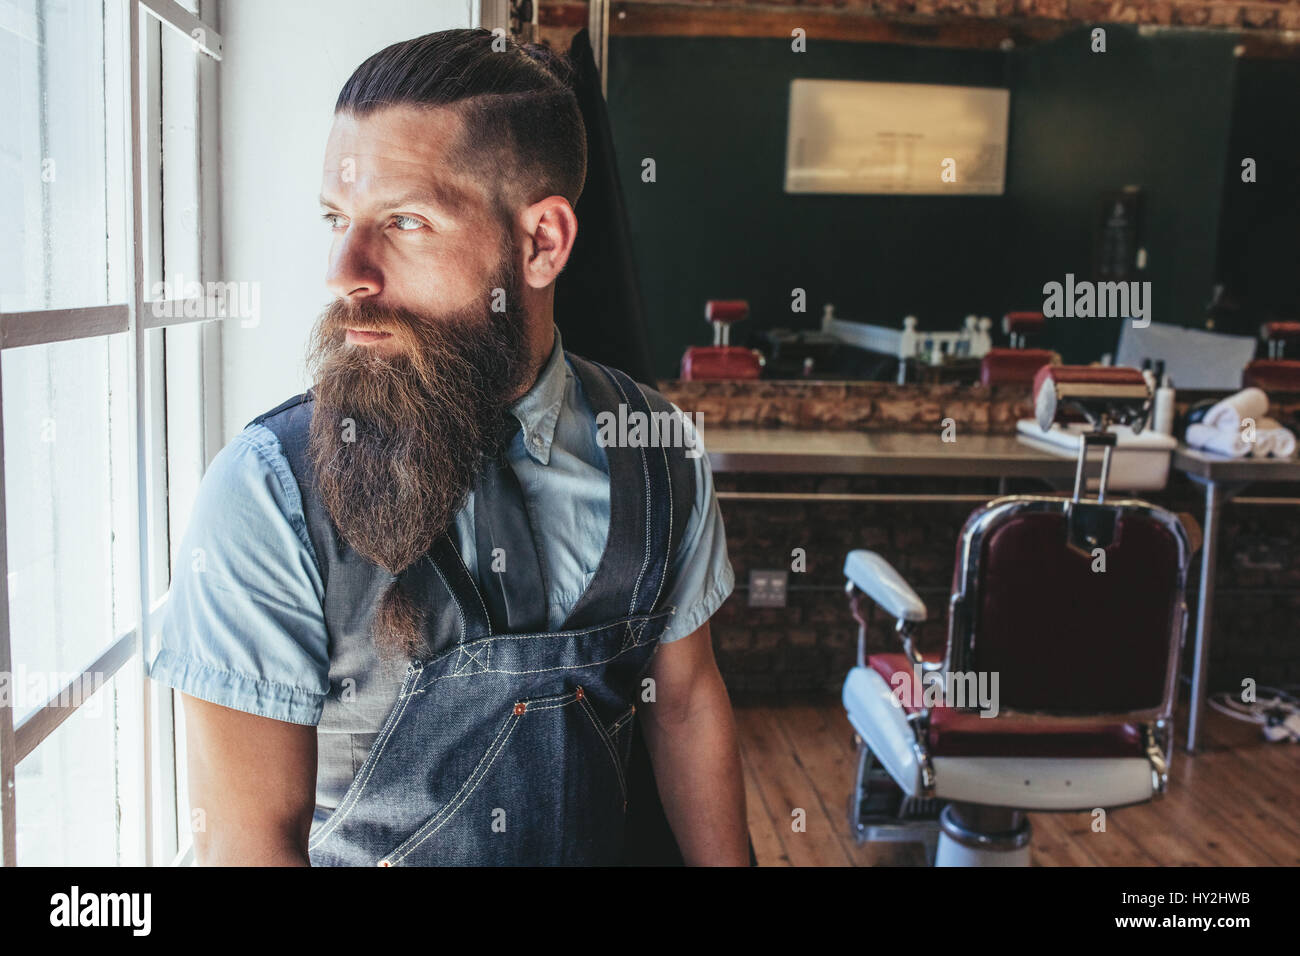 Portrait of barber with apron standing by window and looking away. Male hairdresser looking outside window and thinking. Stock Photo